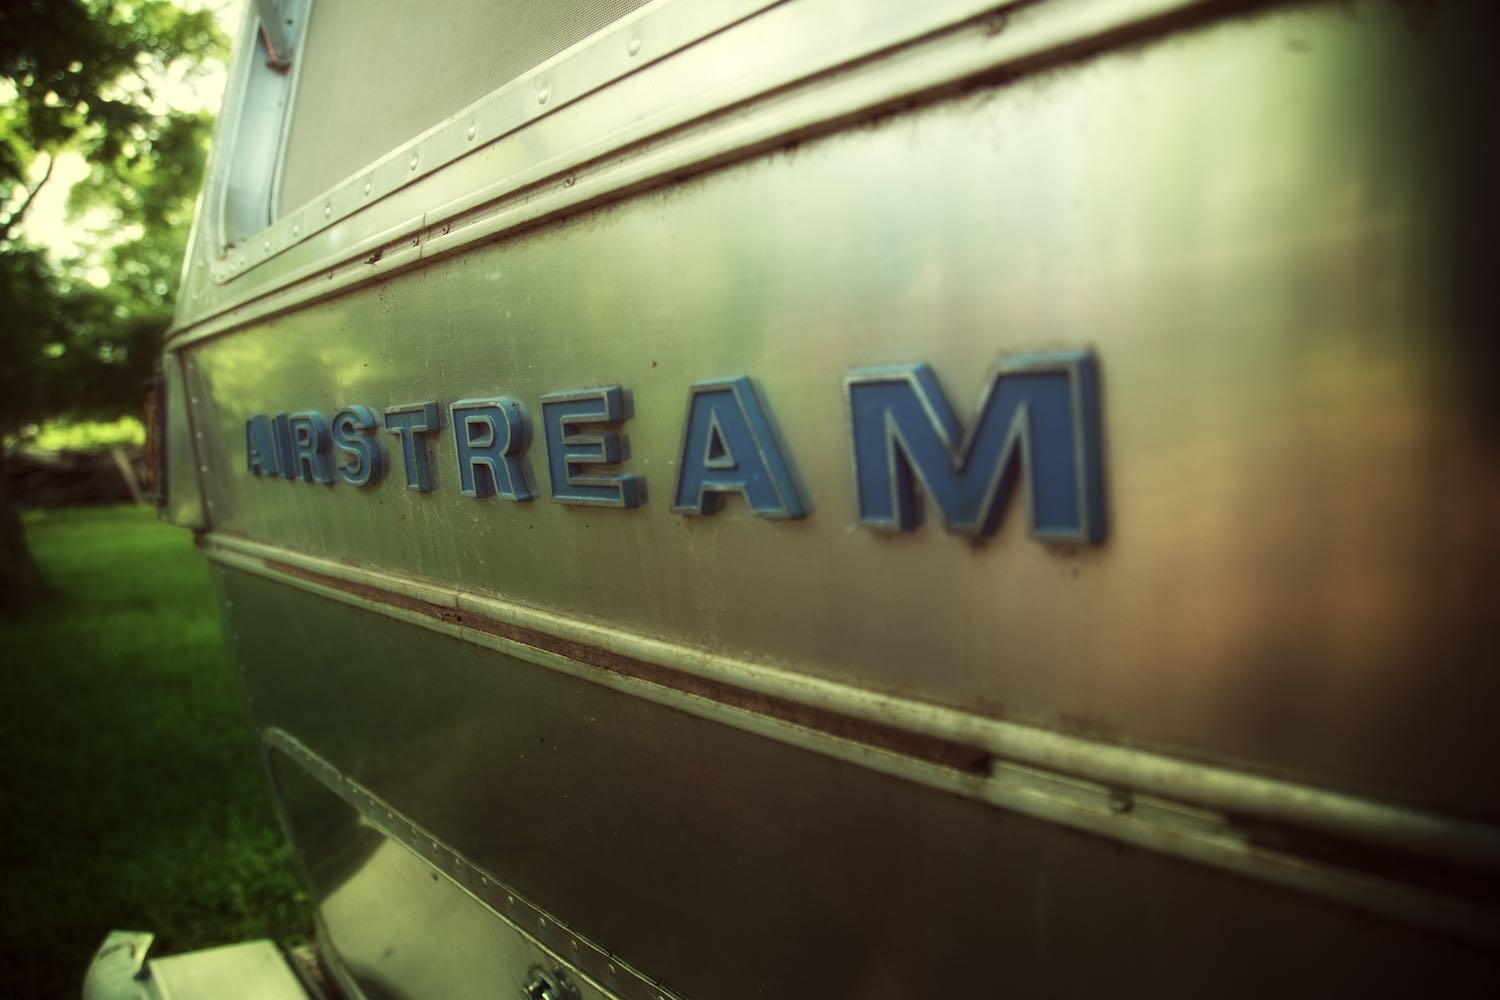 A rear view of our Airstream lettering emblem.